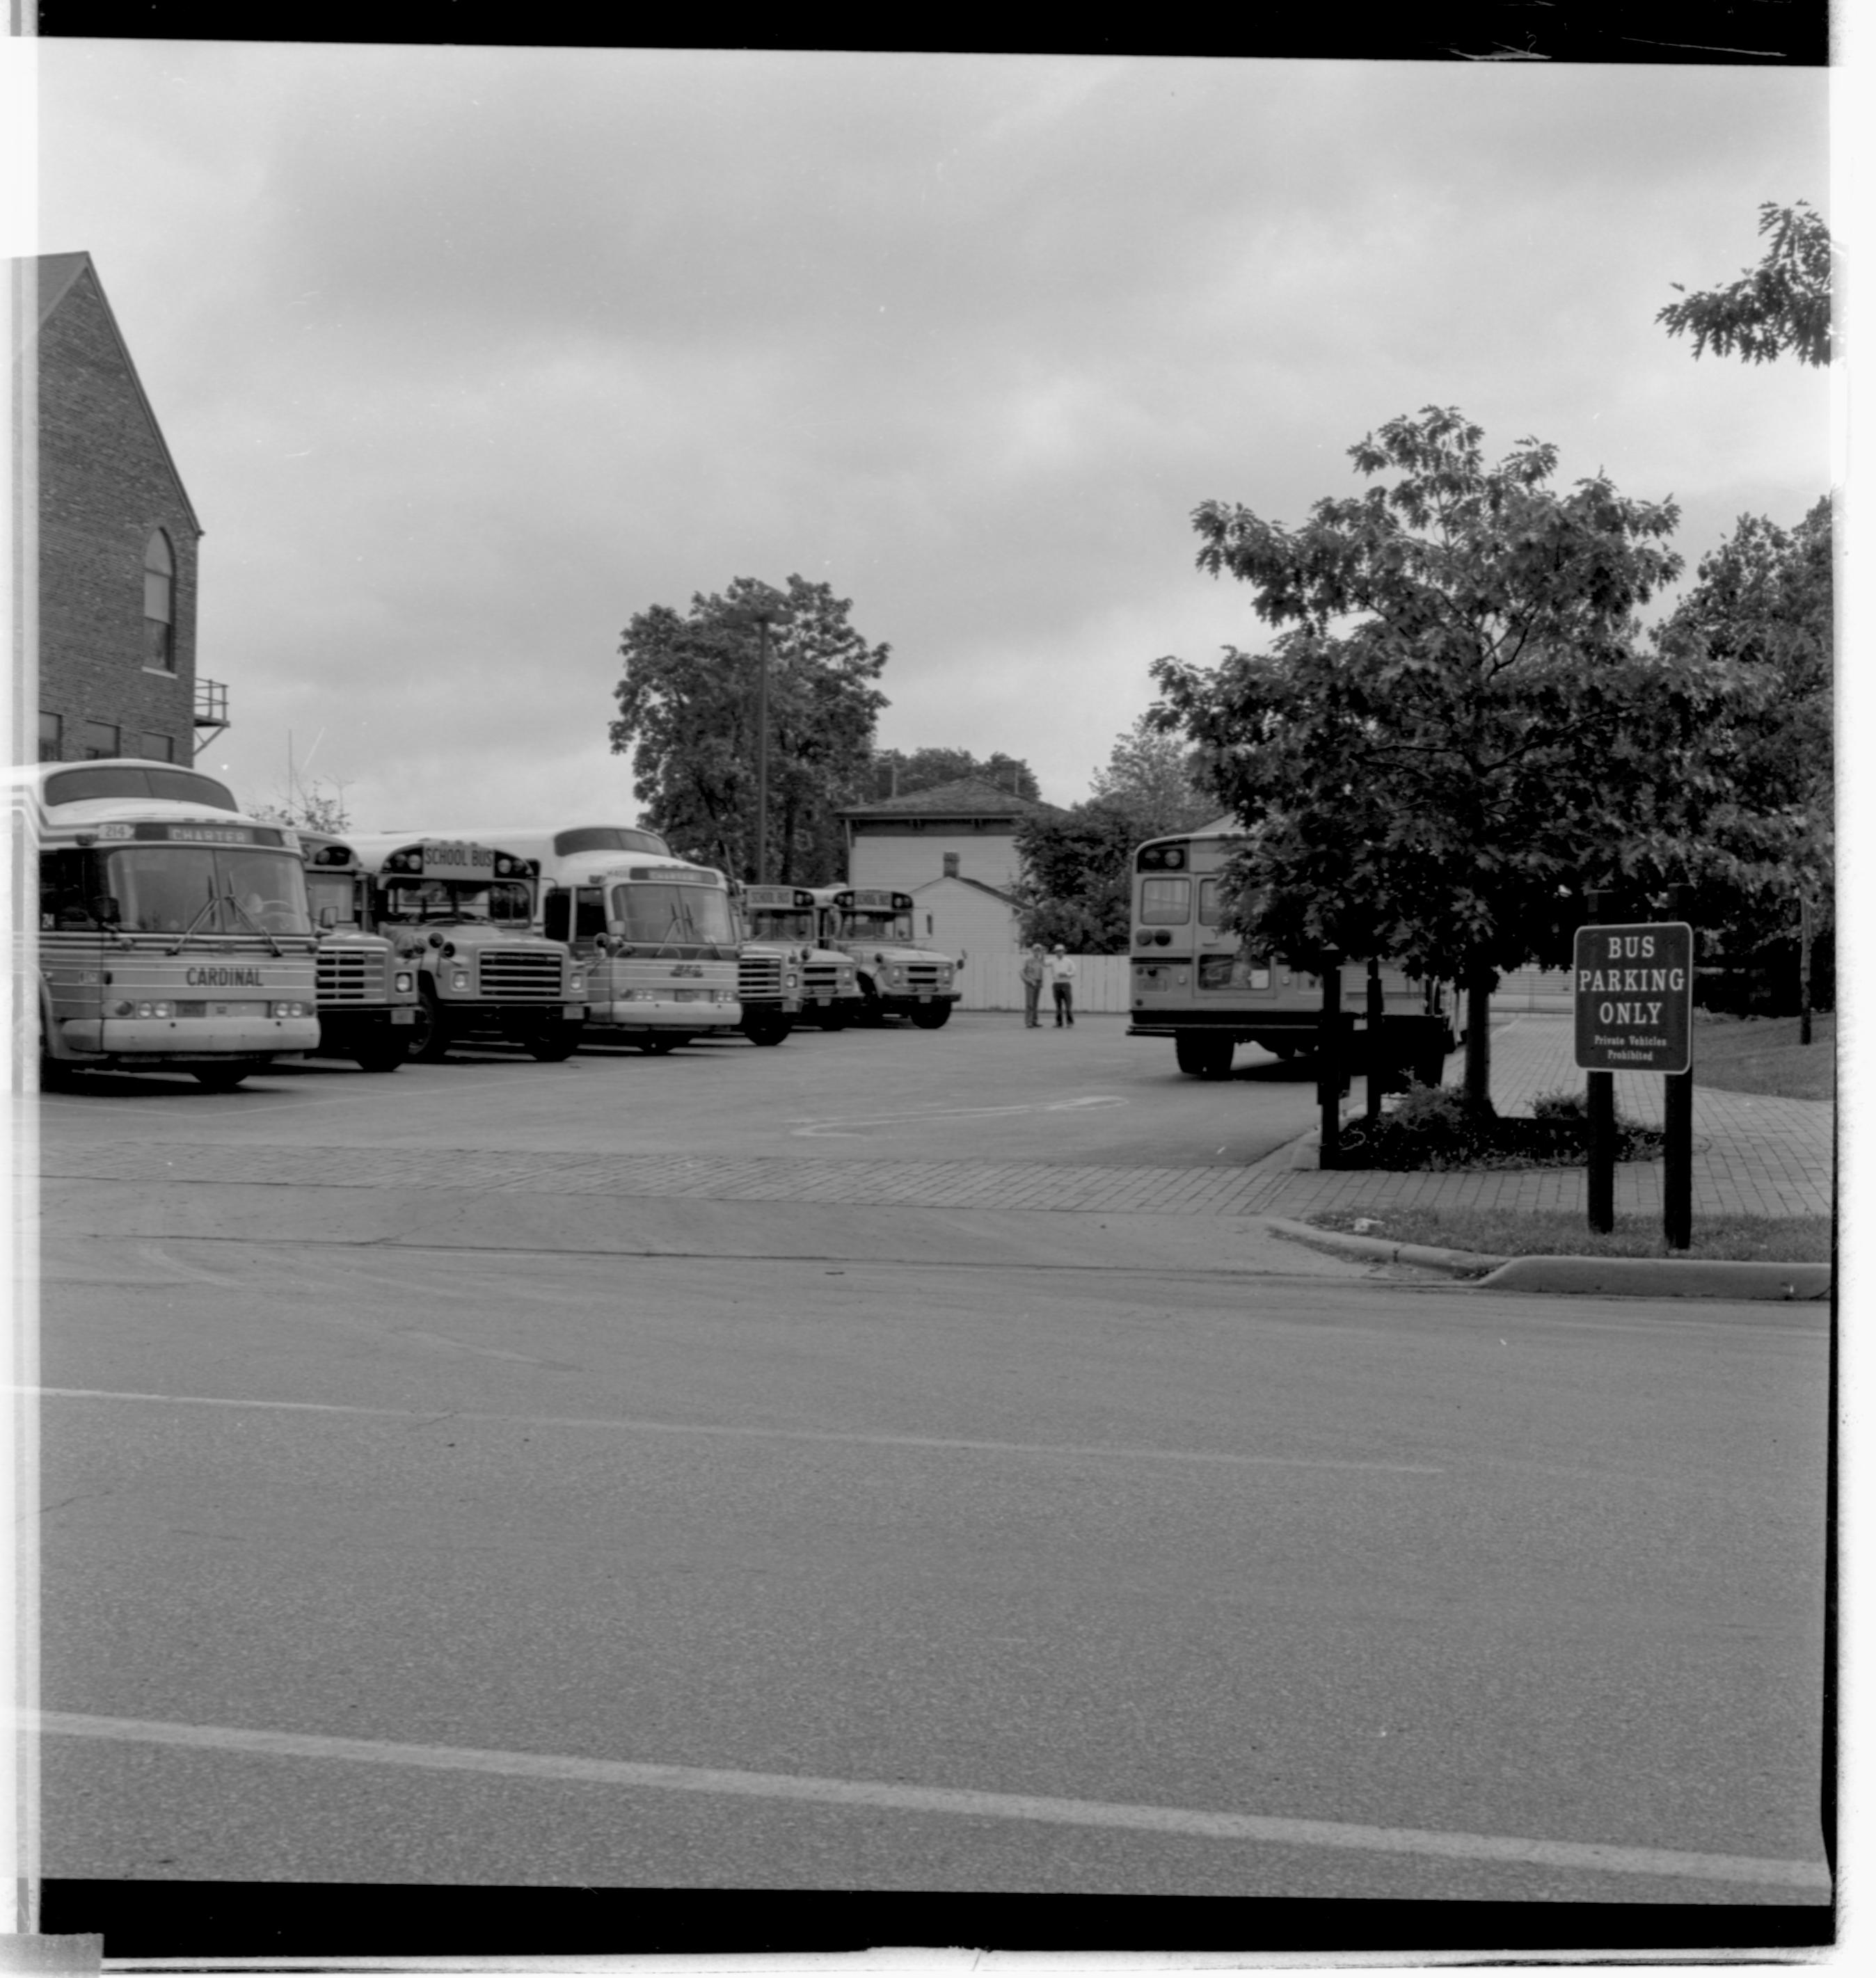 Parking lots - Bus lot, Grace Lutheran Church on left, Beedle House in background looking East Bus, Parking Lot, Grace Lutheran Church, Beedle